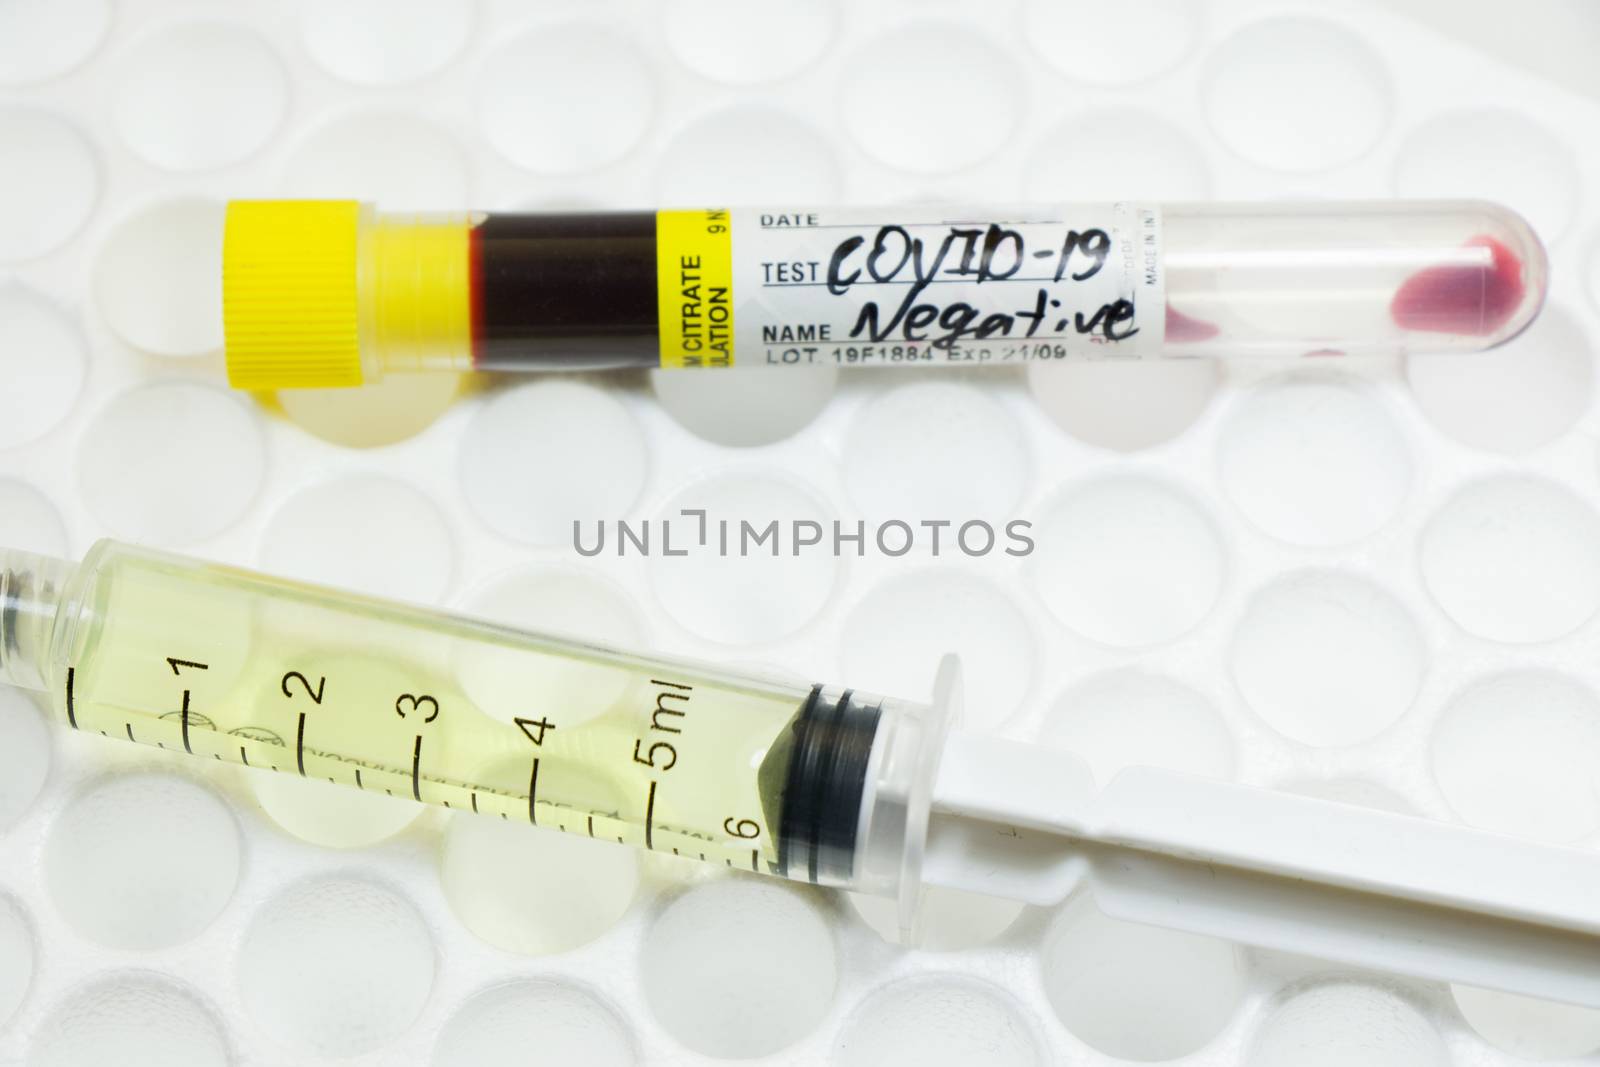 Medical needle and blood tube, corona virus or covid-19 vaccine. Close-up and studio shoot.